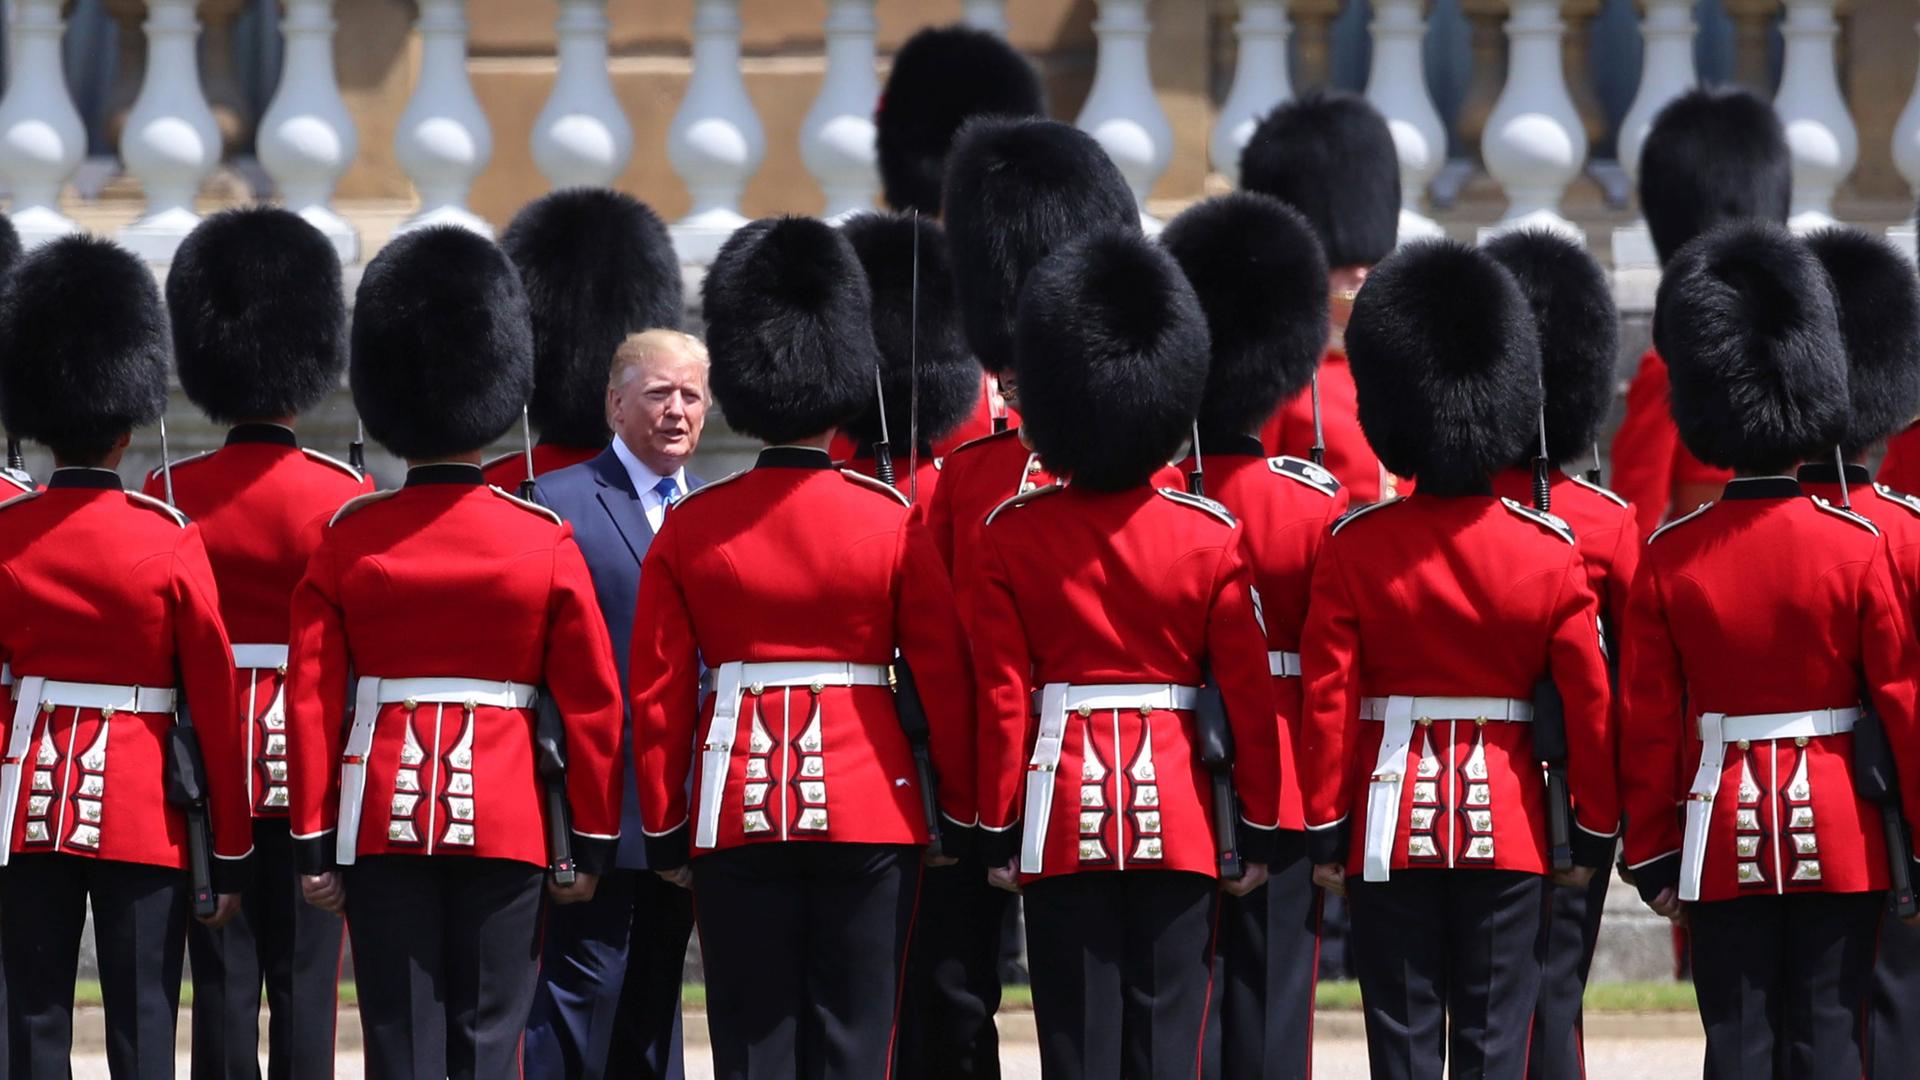 Donald Trump is shown standing among more than a dozen of the Royal honor guard dressed in traditional red uniforms and tall black hats.